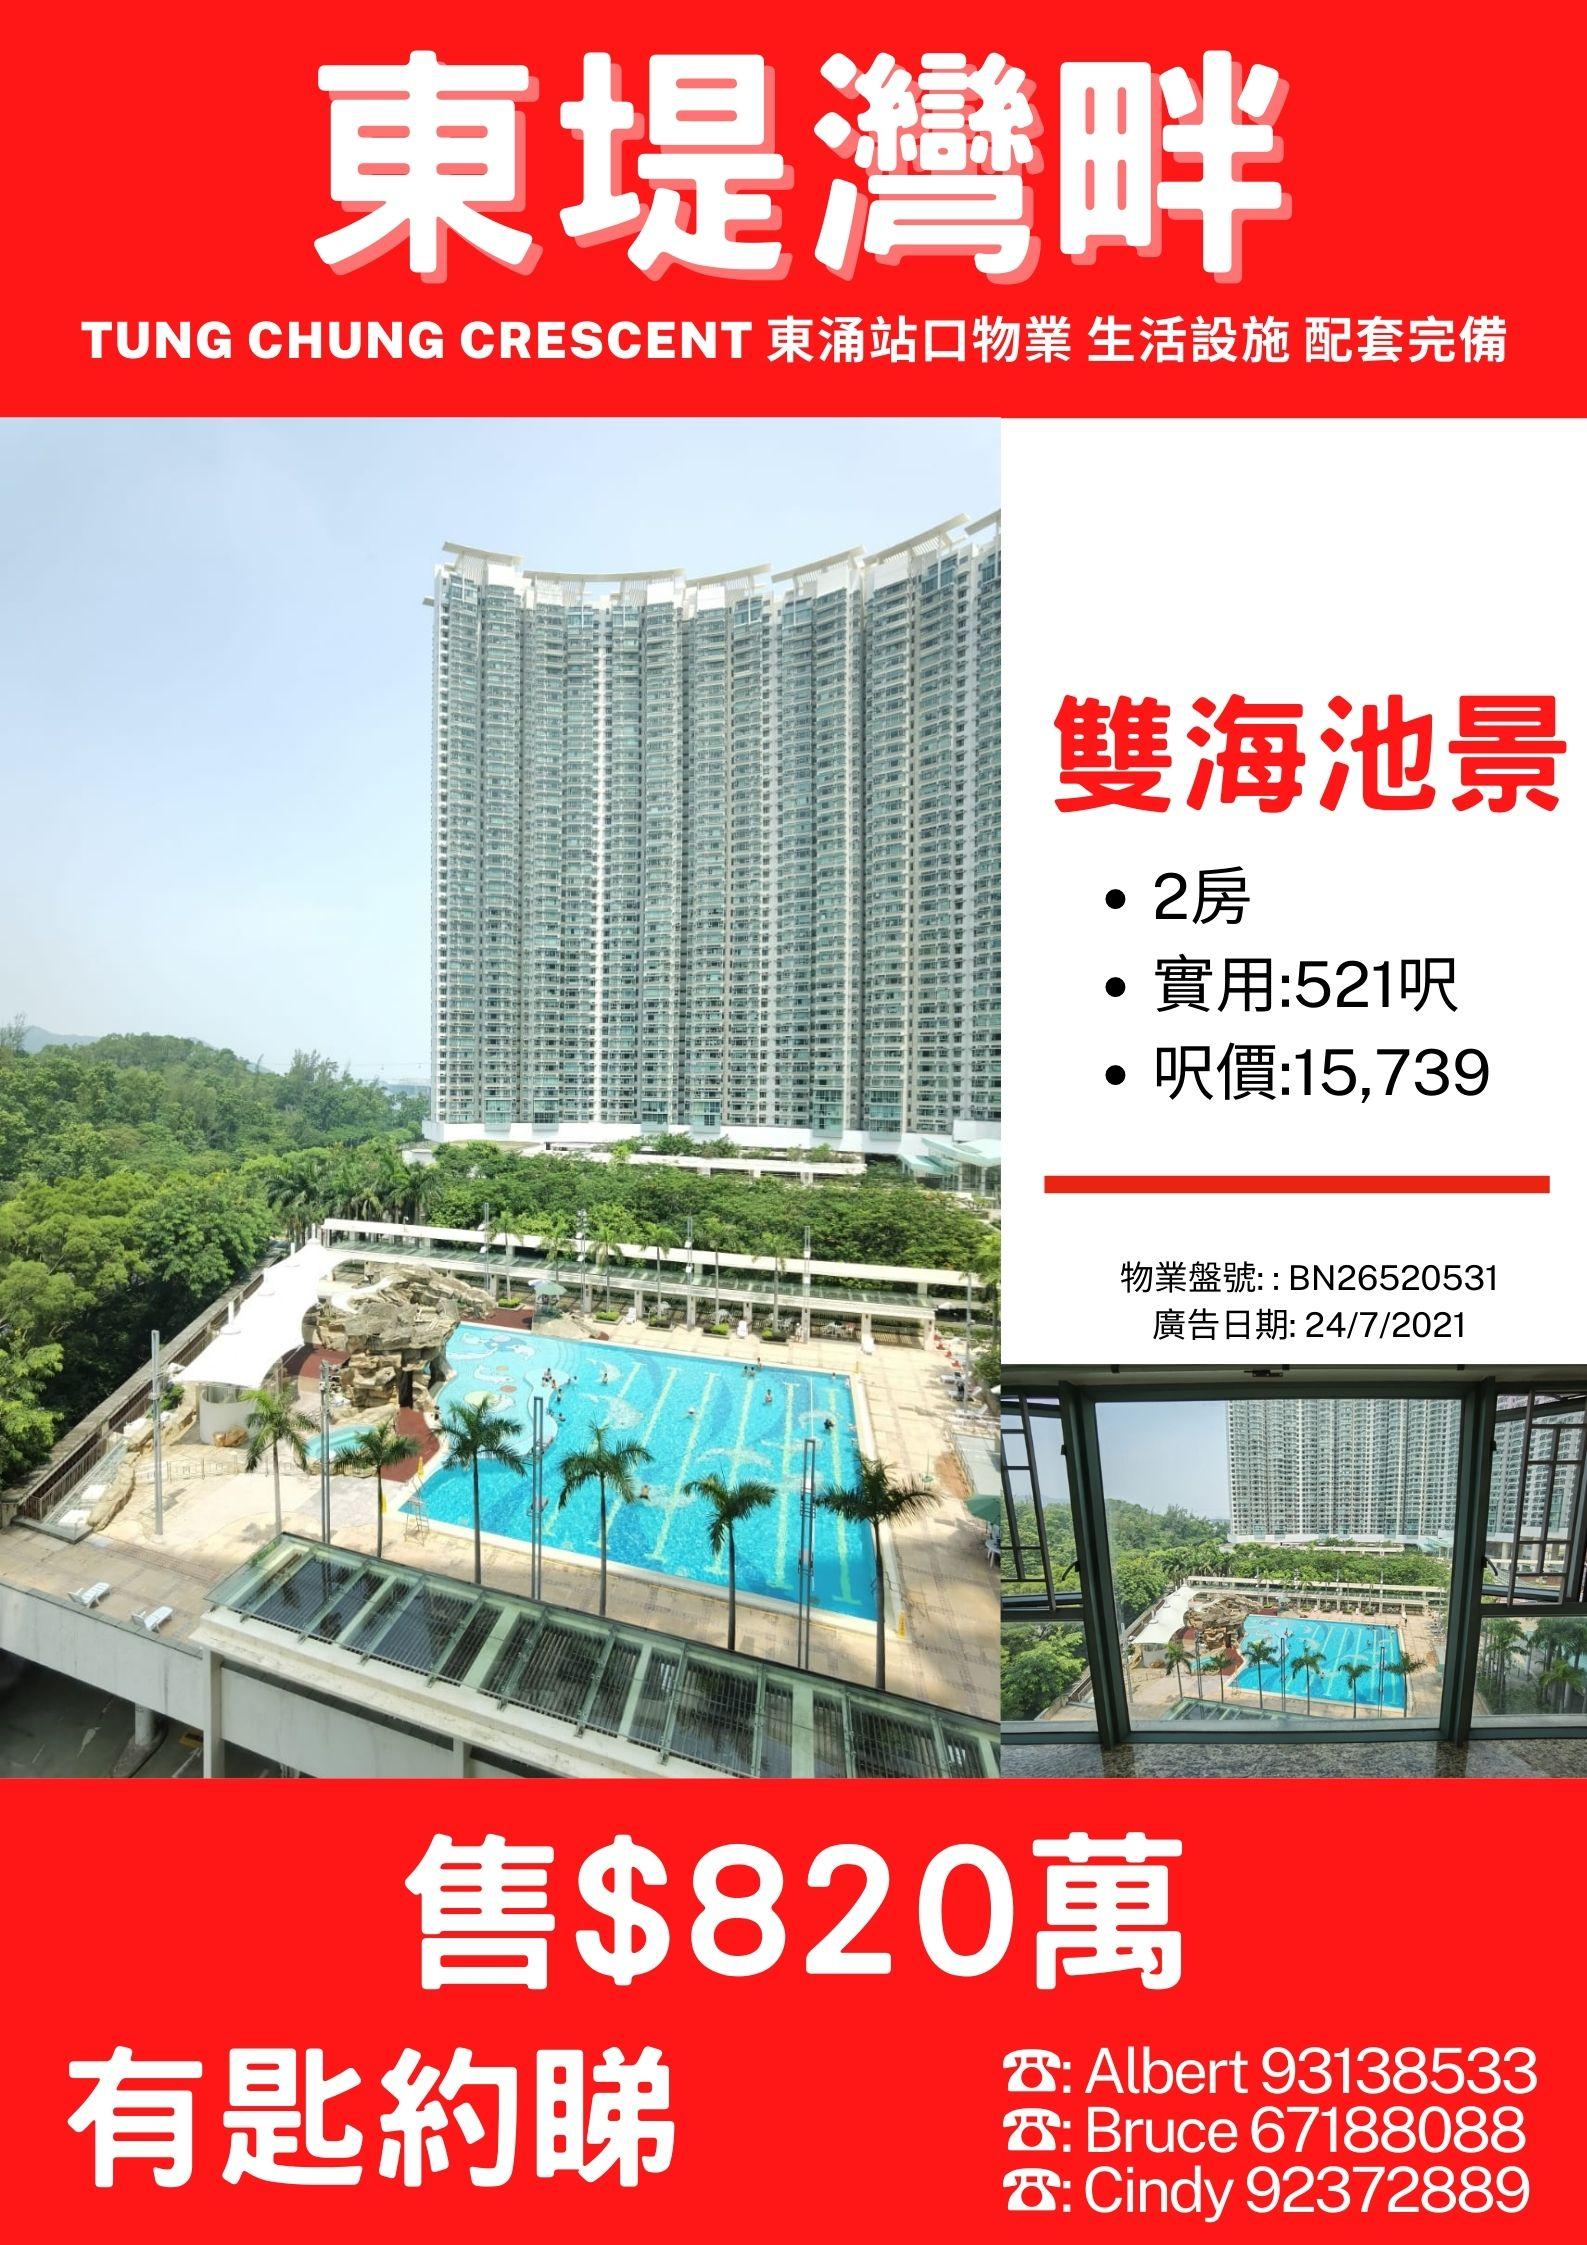 Shuanghai pool view, rare in the same area, with a spoon about 67188088 Chen Sheng